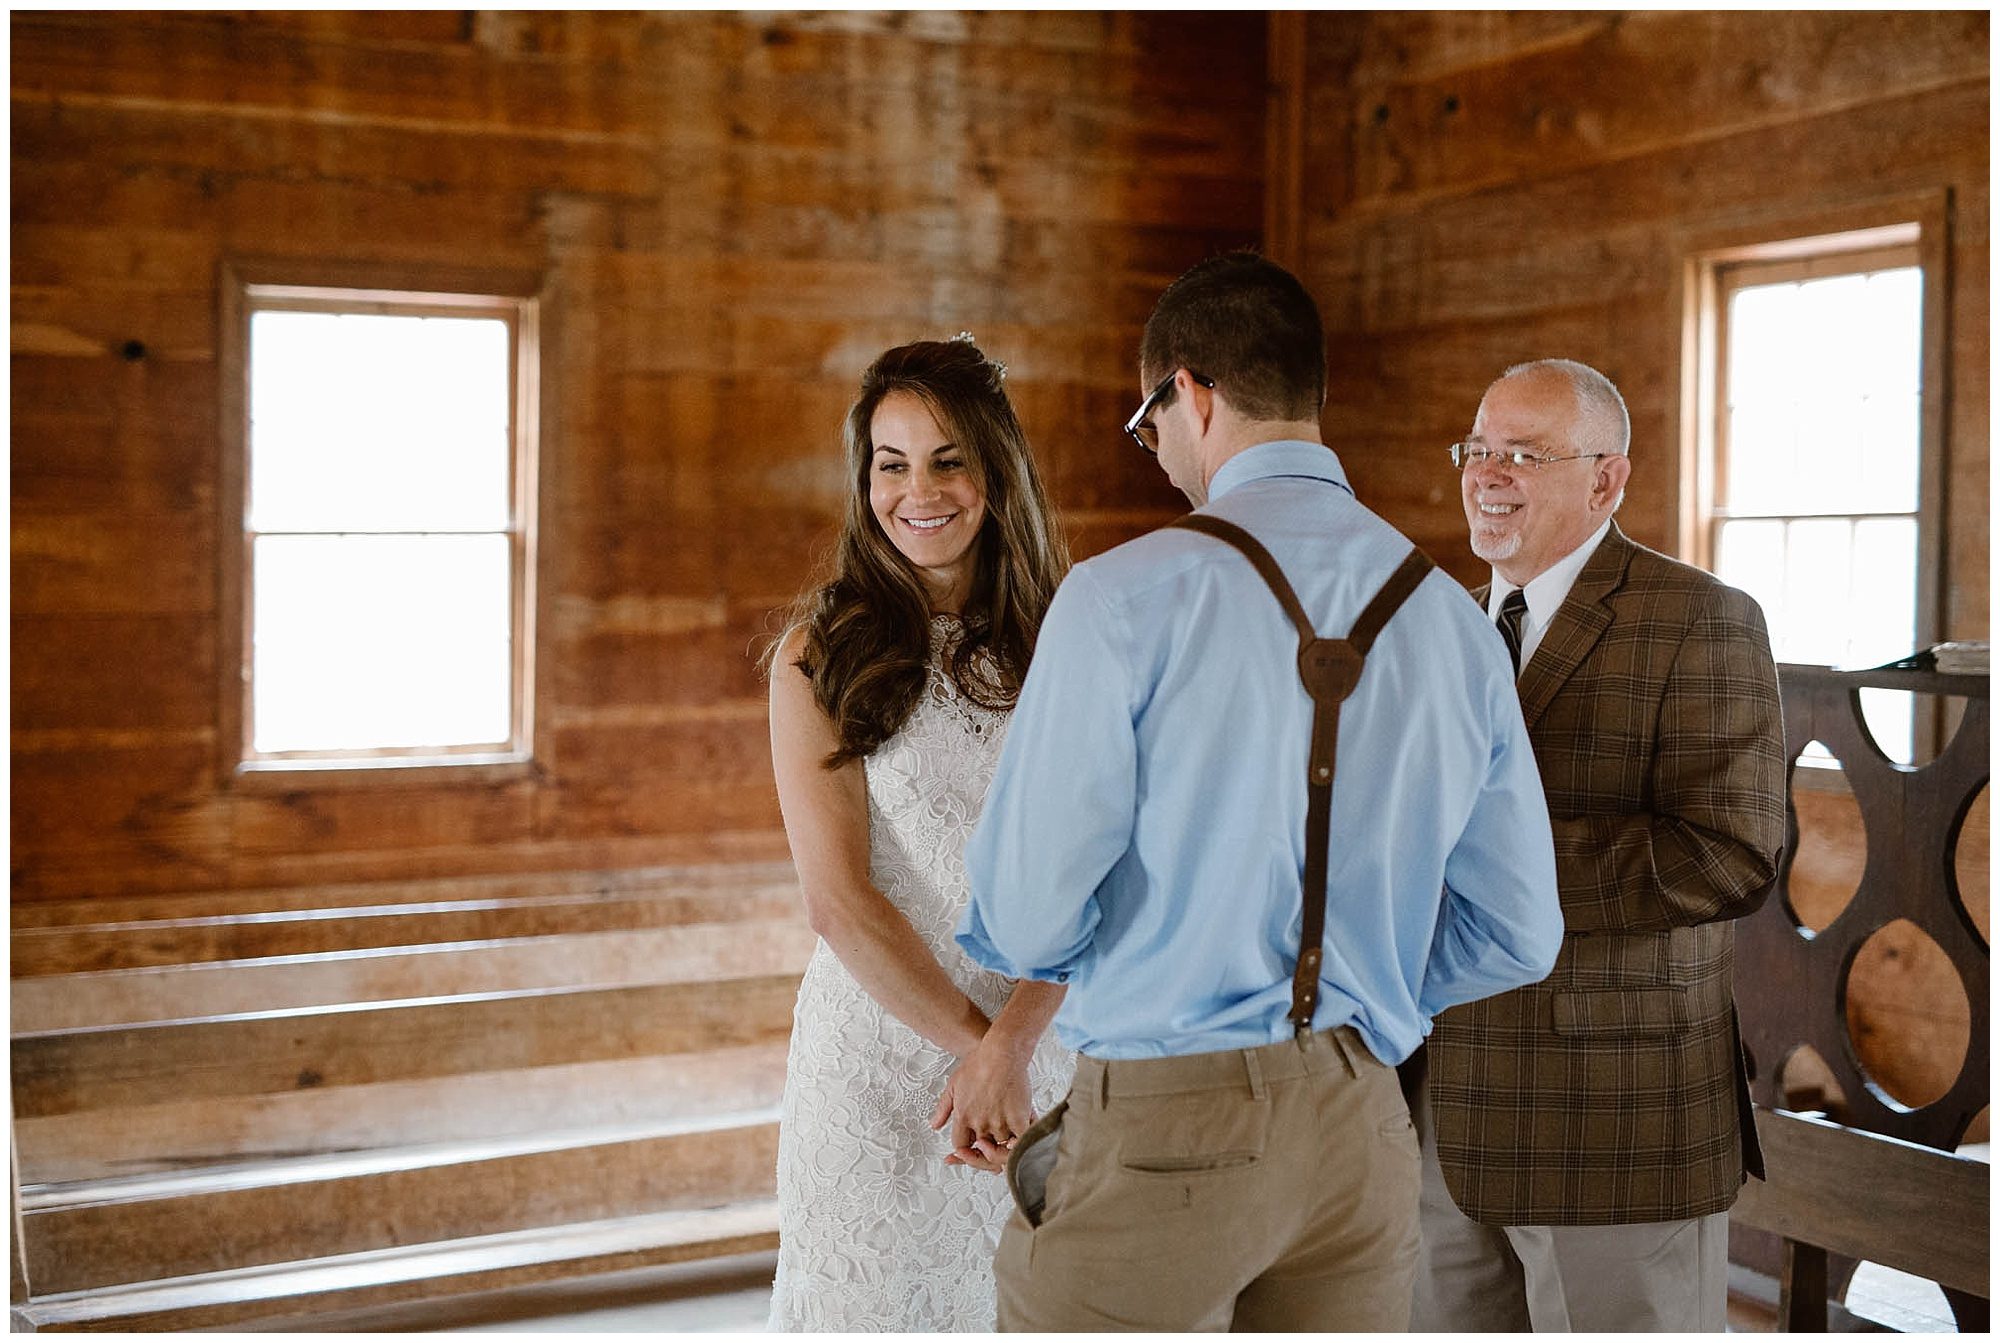 Primitive Baptist Church Wedding in the Smoky Mountains